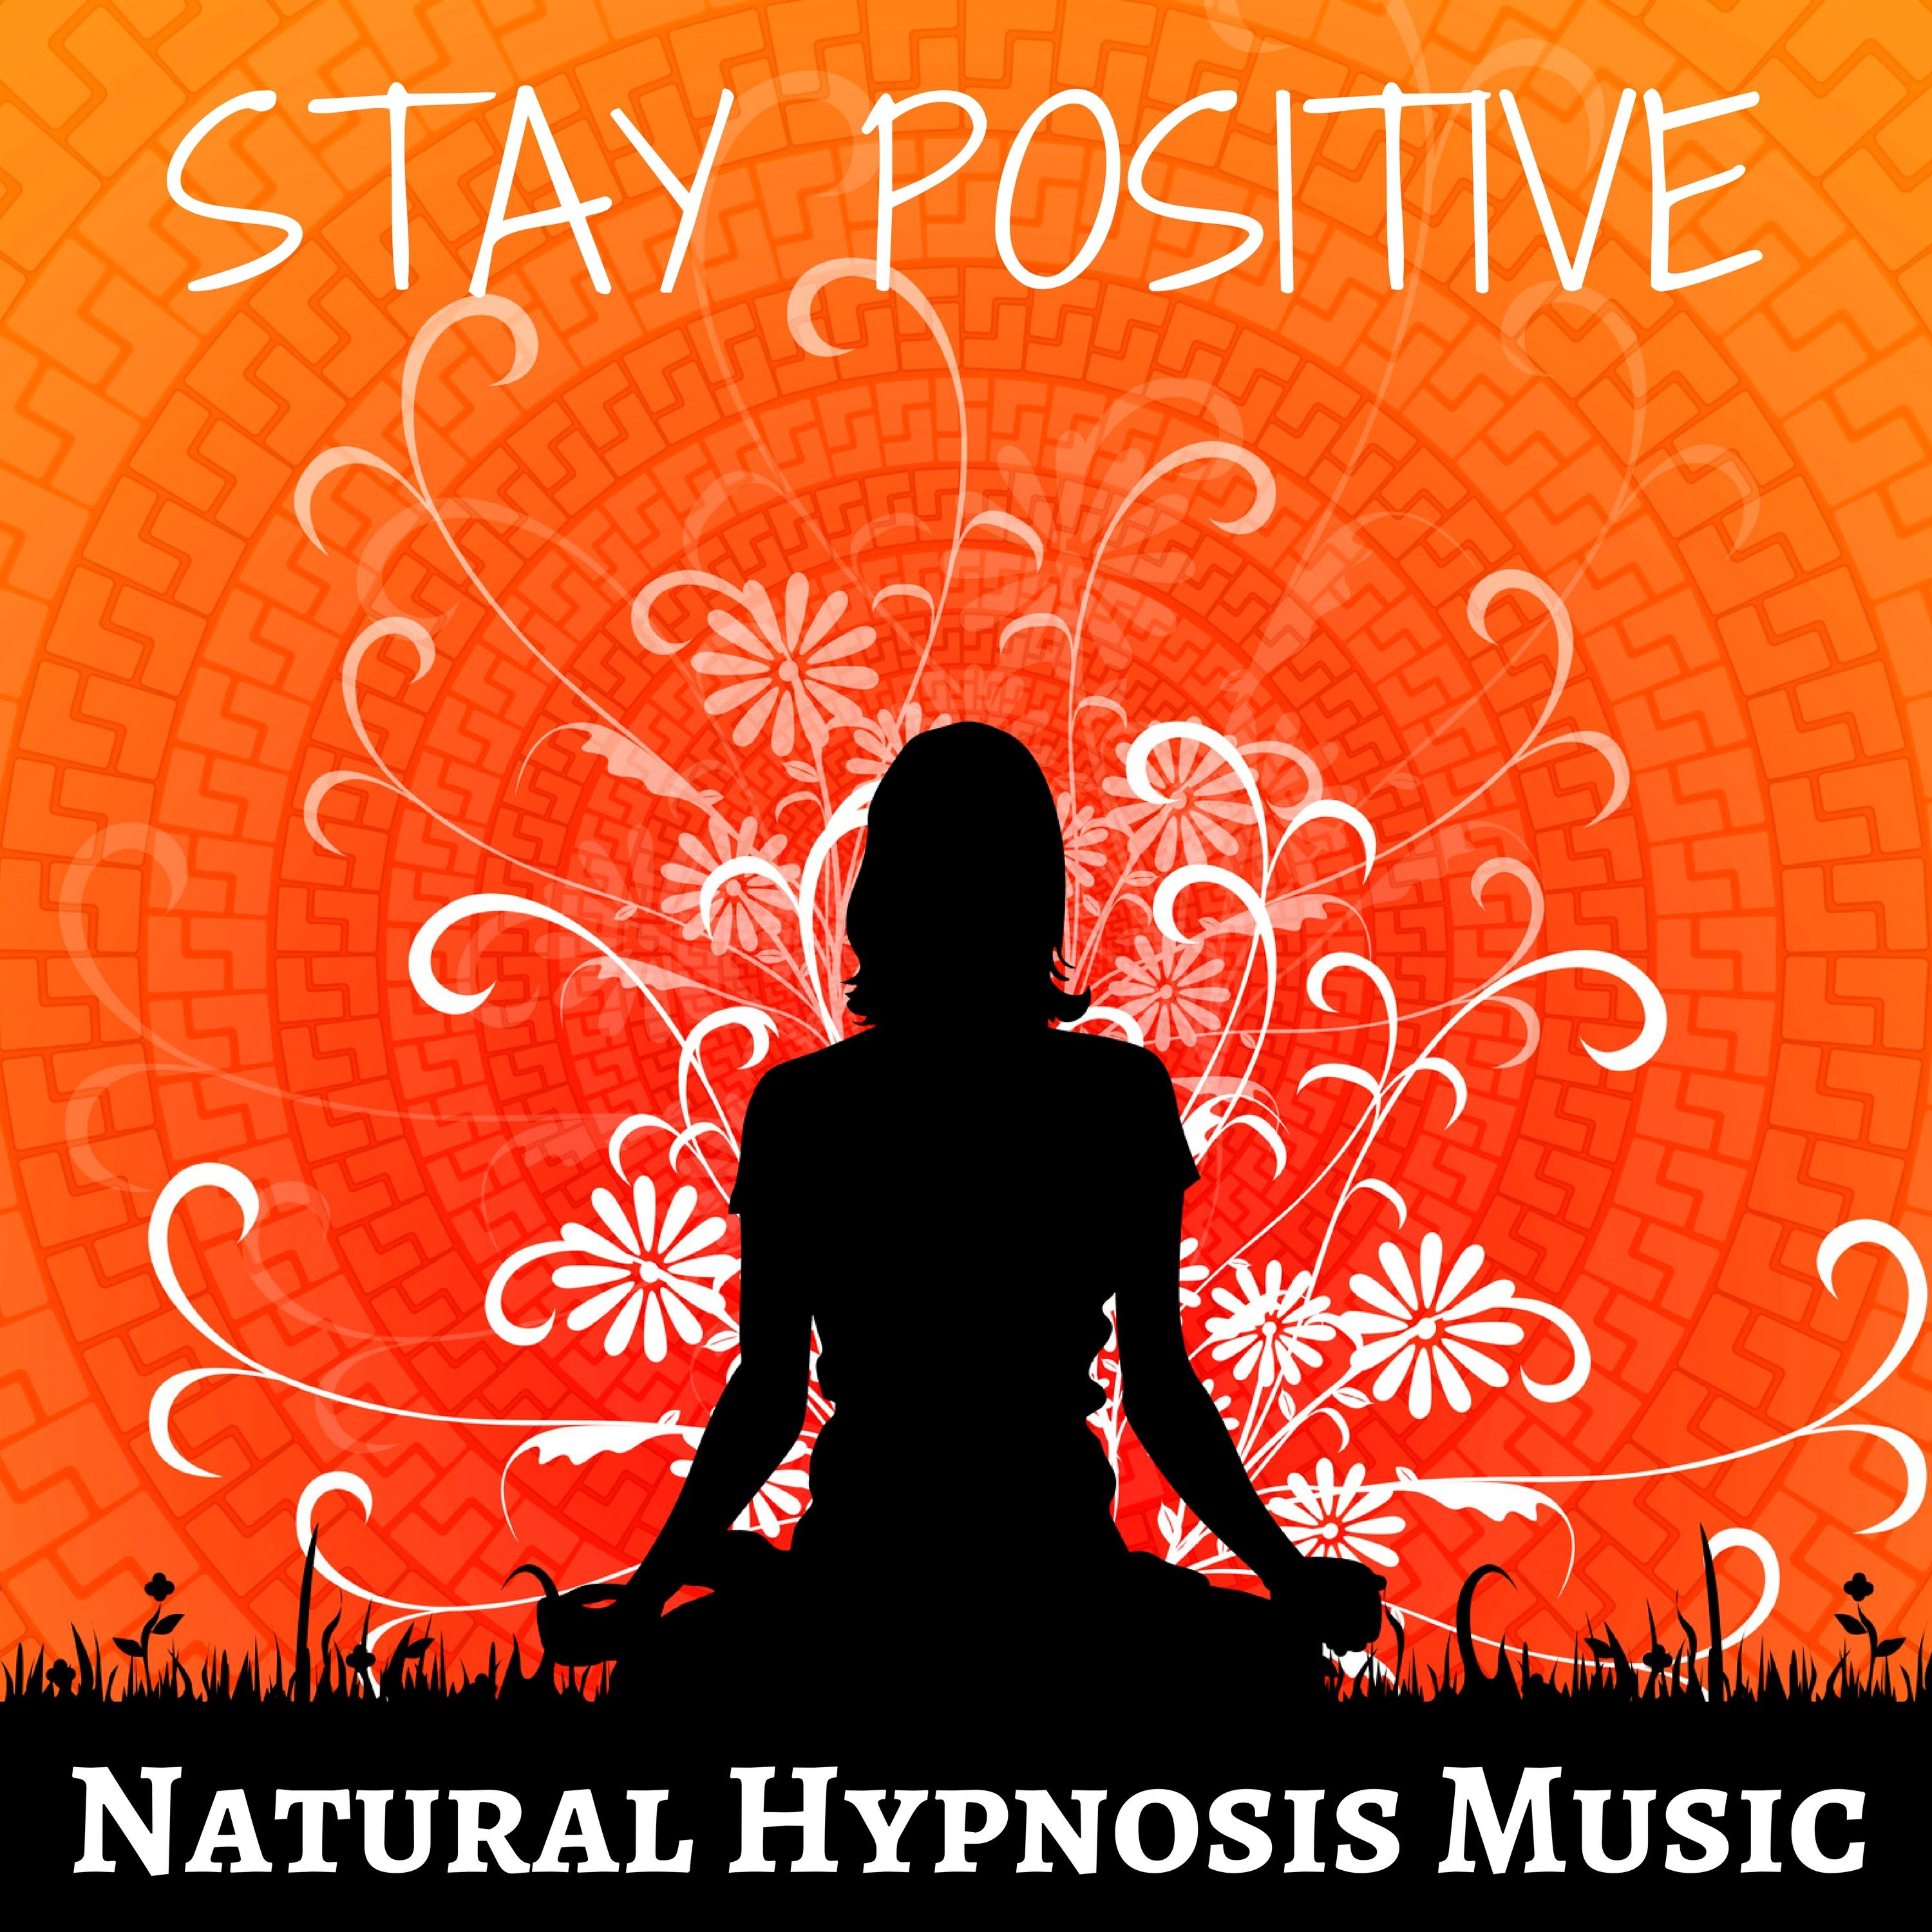 Stay Positive: Stress Reduction during Bedtime, Natural Hypnosis Music with Nature Relaxing Sounds